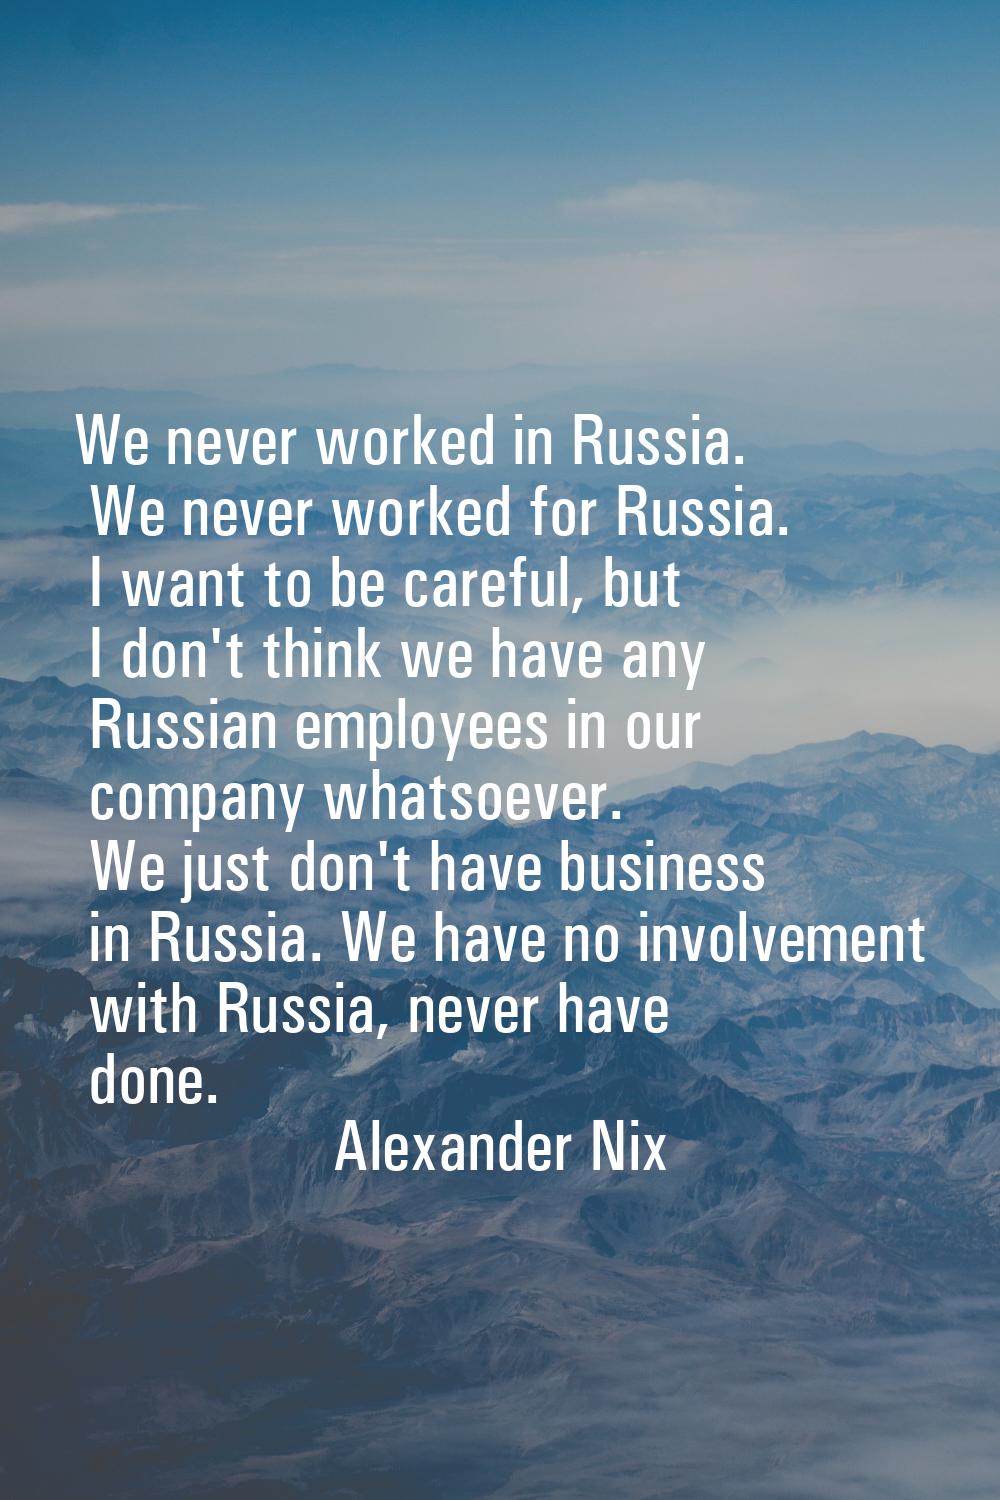 We never worked in Russia. We never worked for Russia. I want to be careful, but I don't think we h